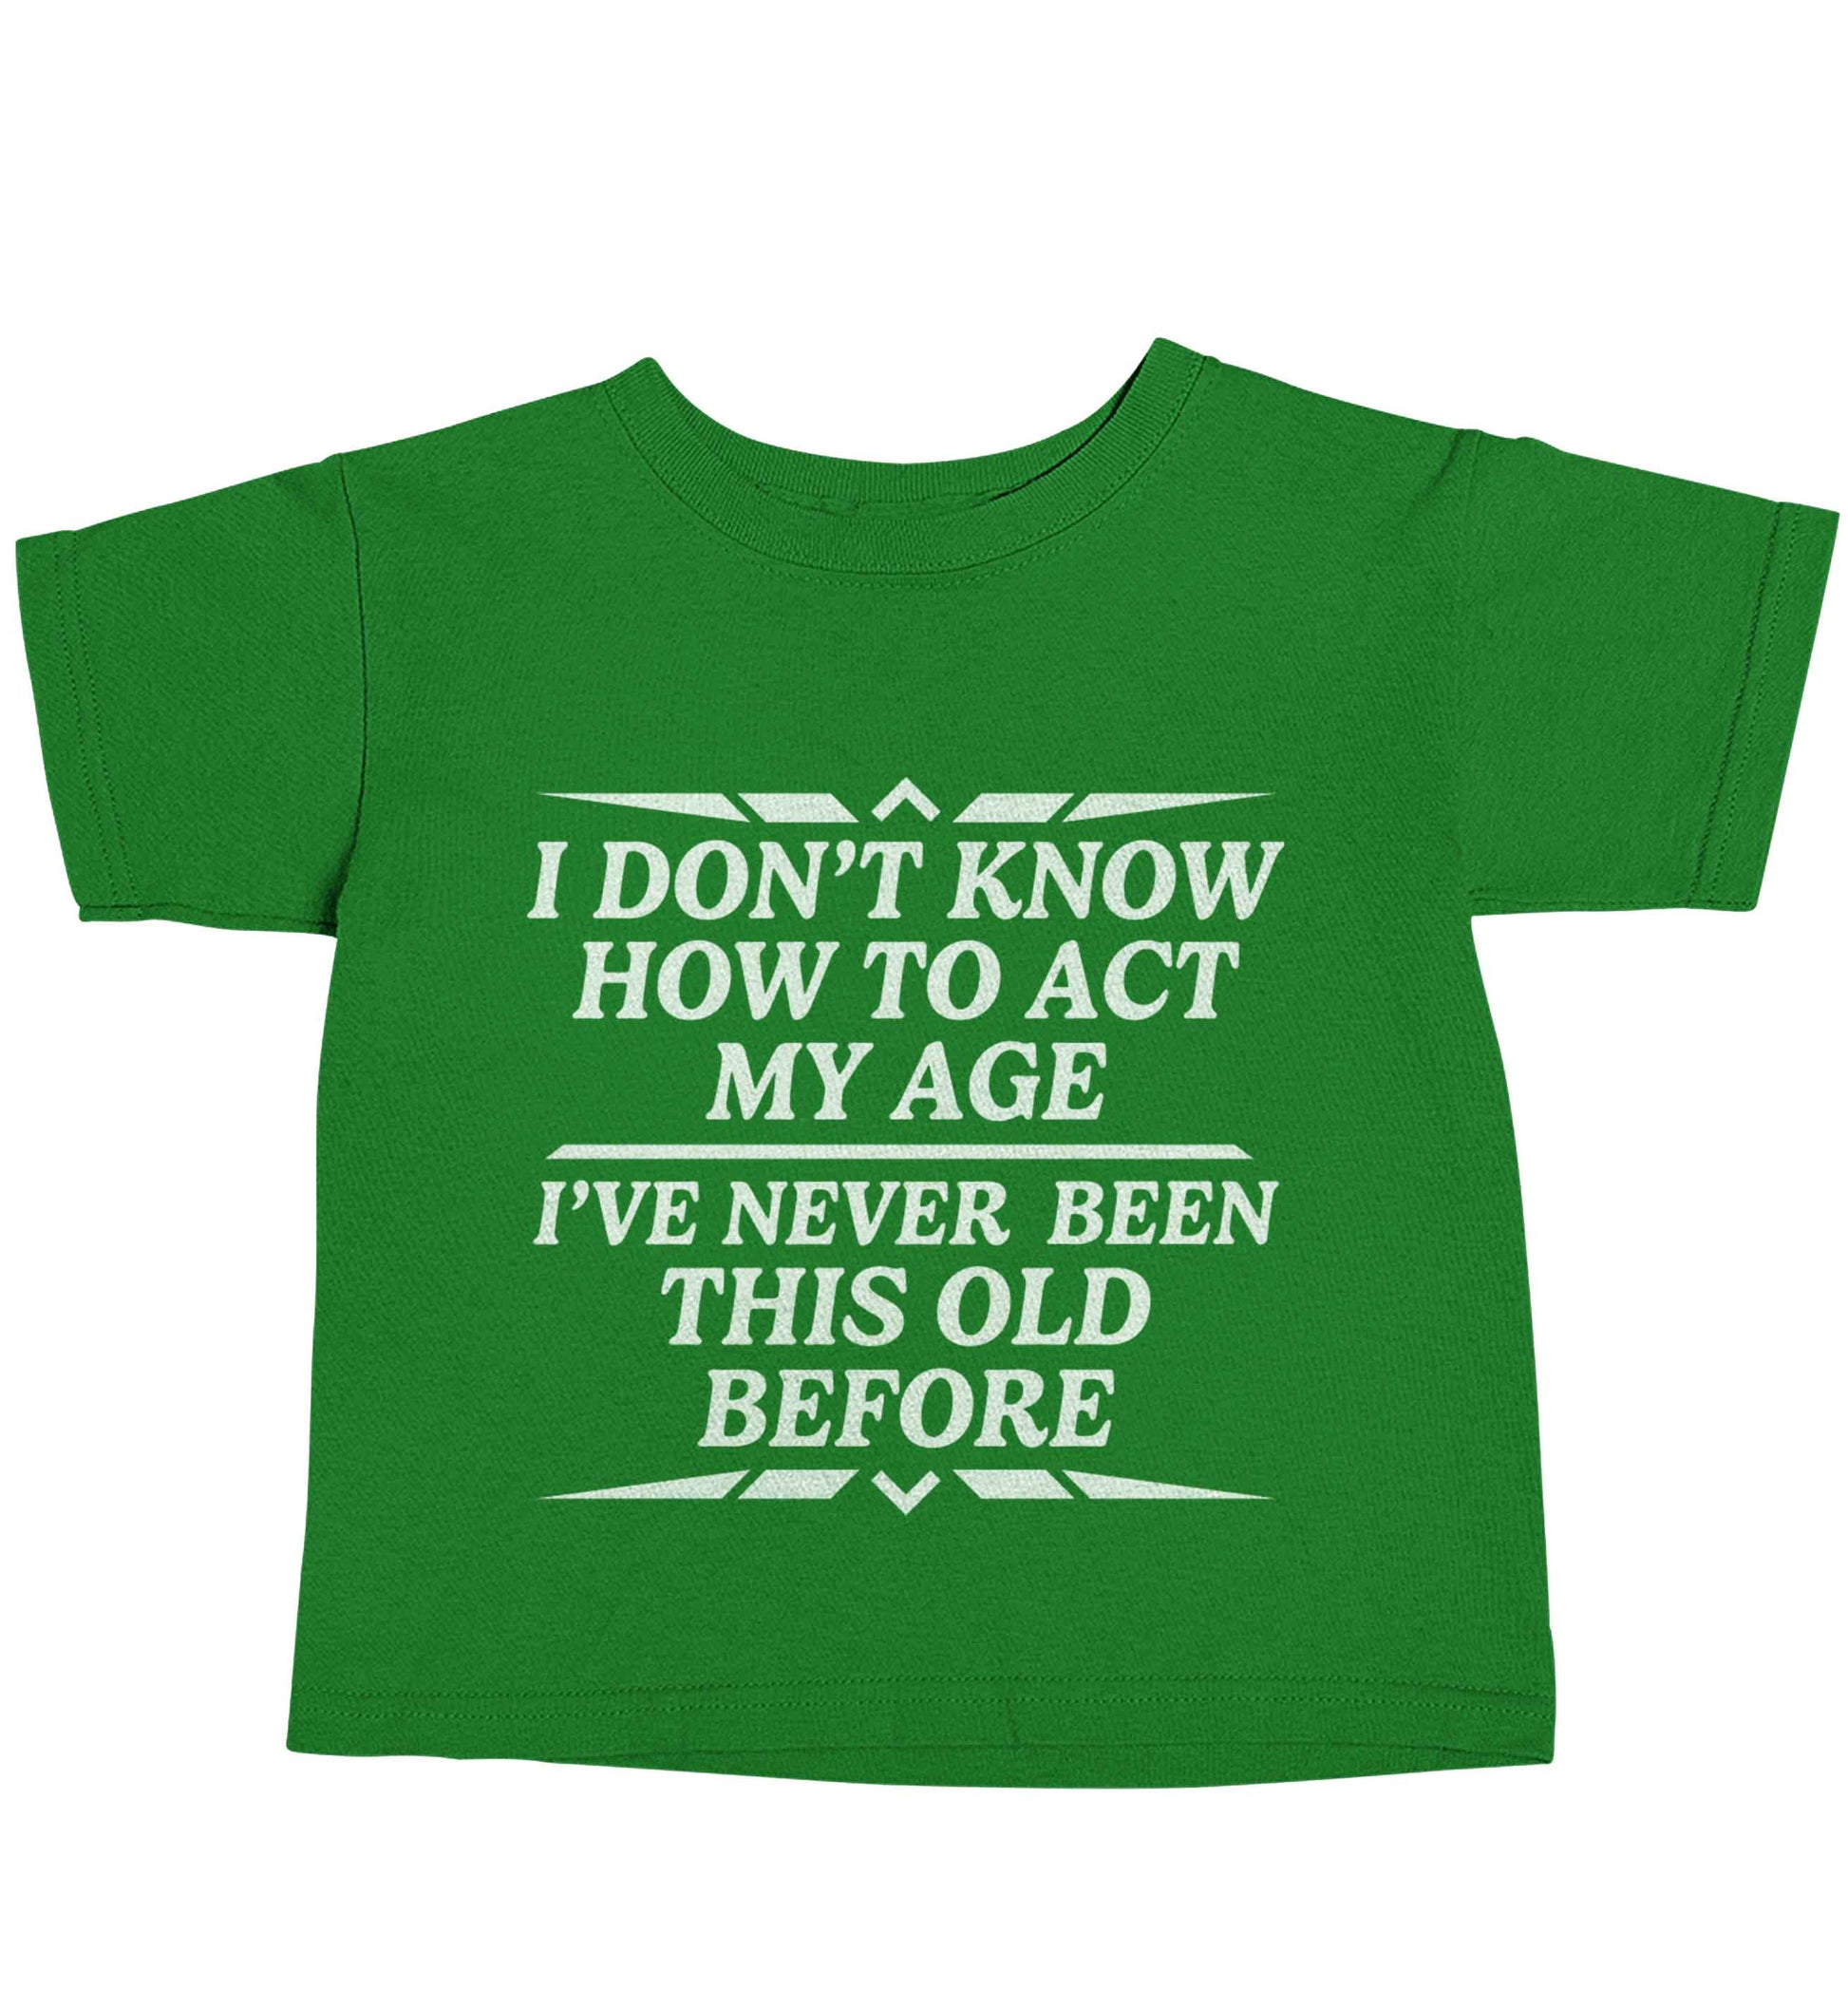 I don't know how to act my age I've never been this old before green baby toddler Tshirt 2 Years